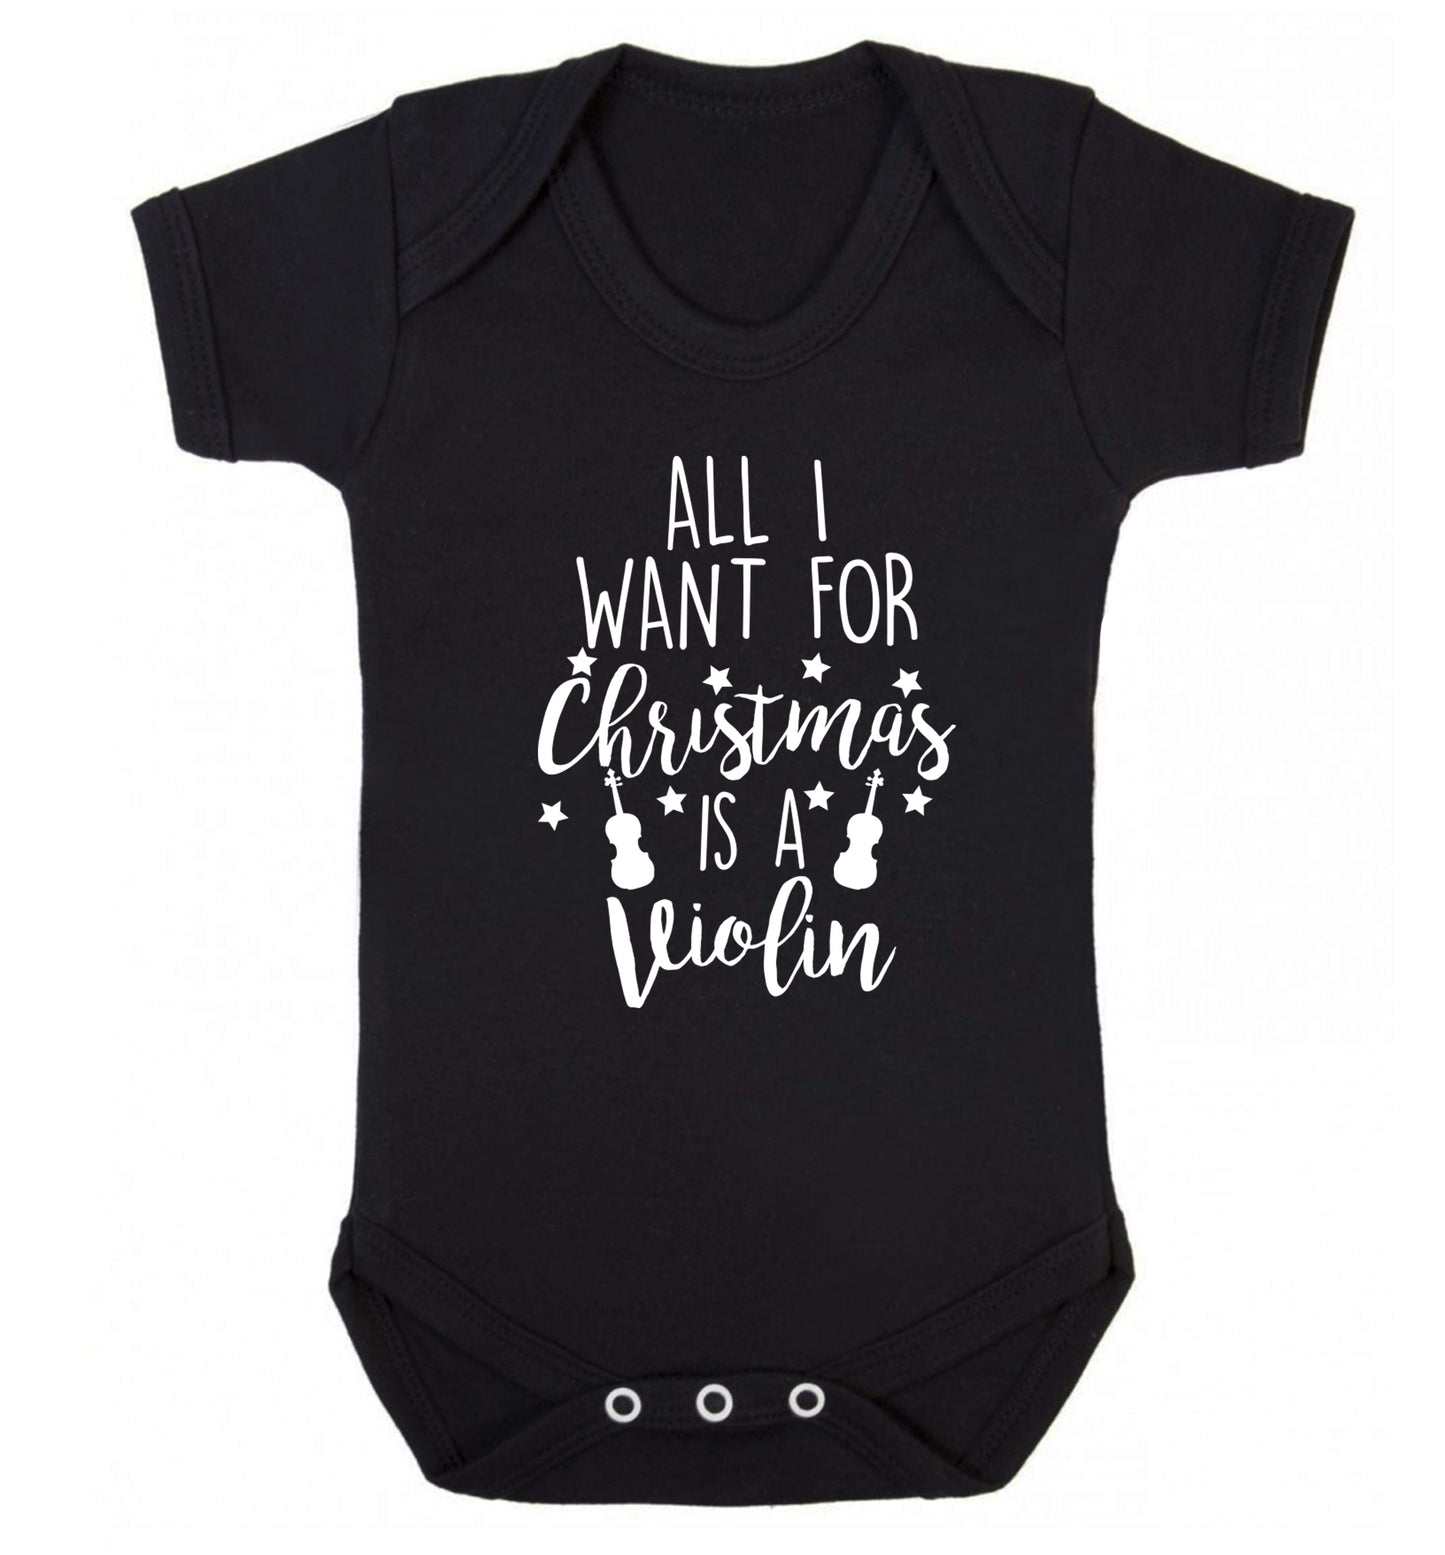 All I Want For Christmas is a Violin Baby Vest black 18-24 months